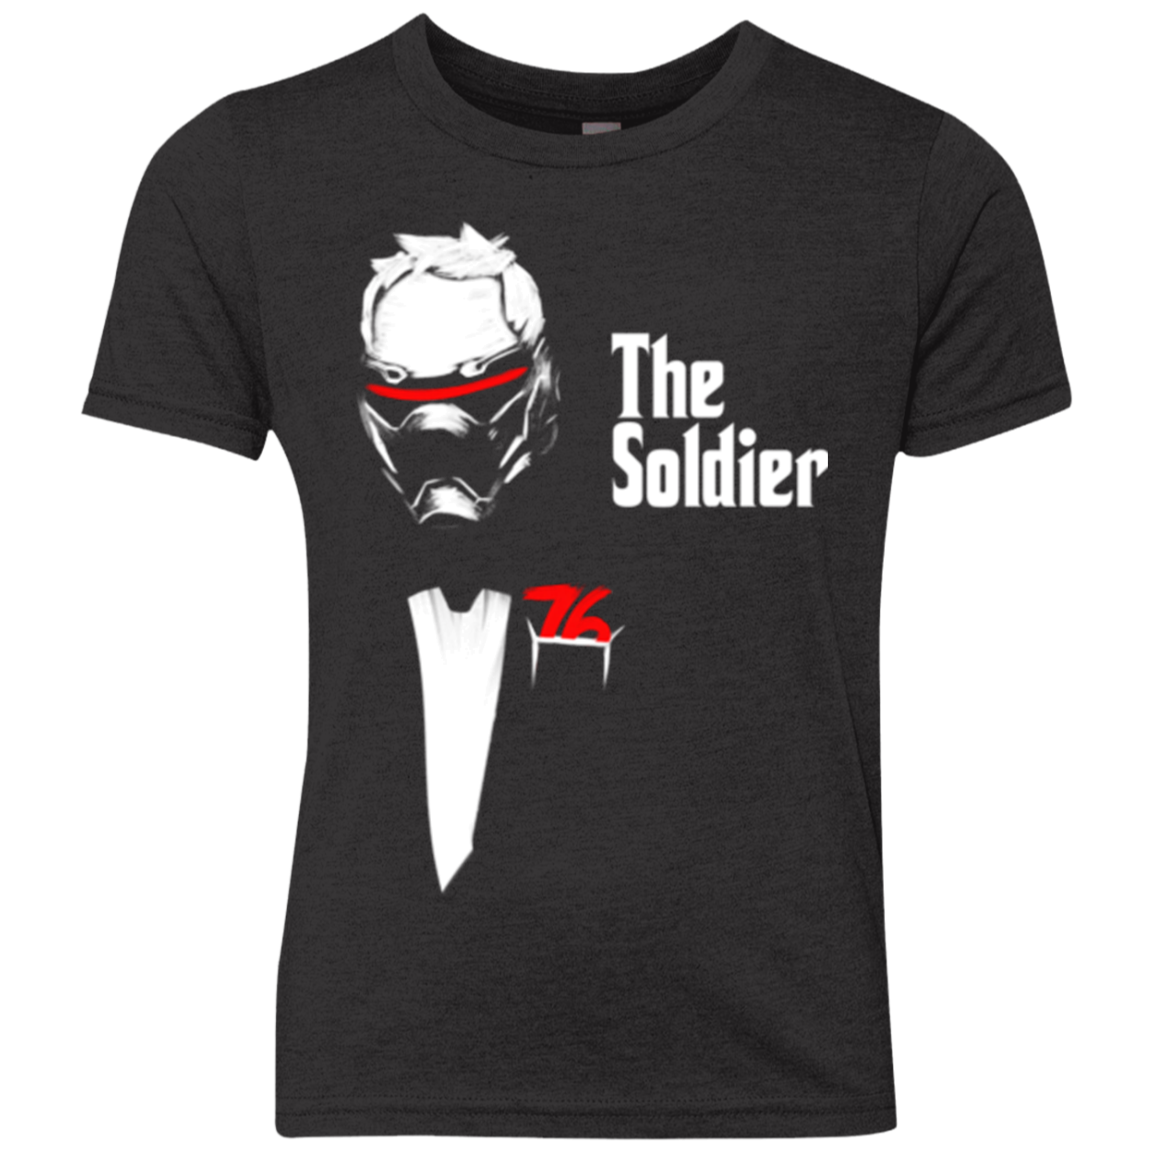 The Soldier (1) Youth Triblend T-Shirt